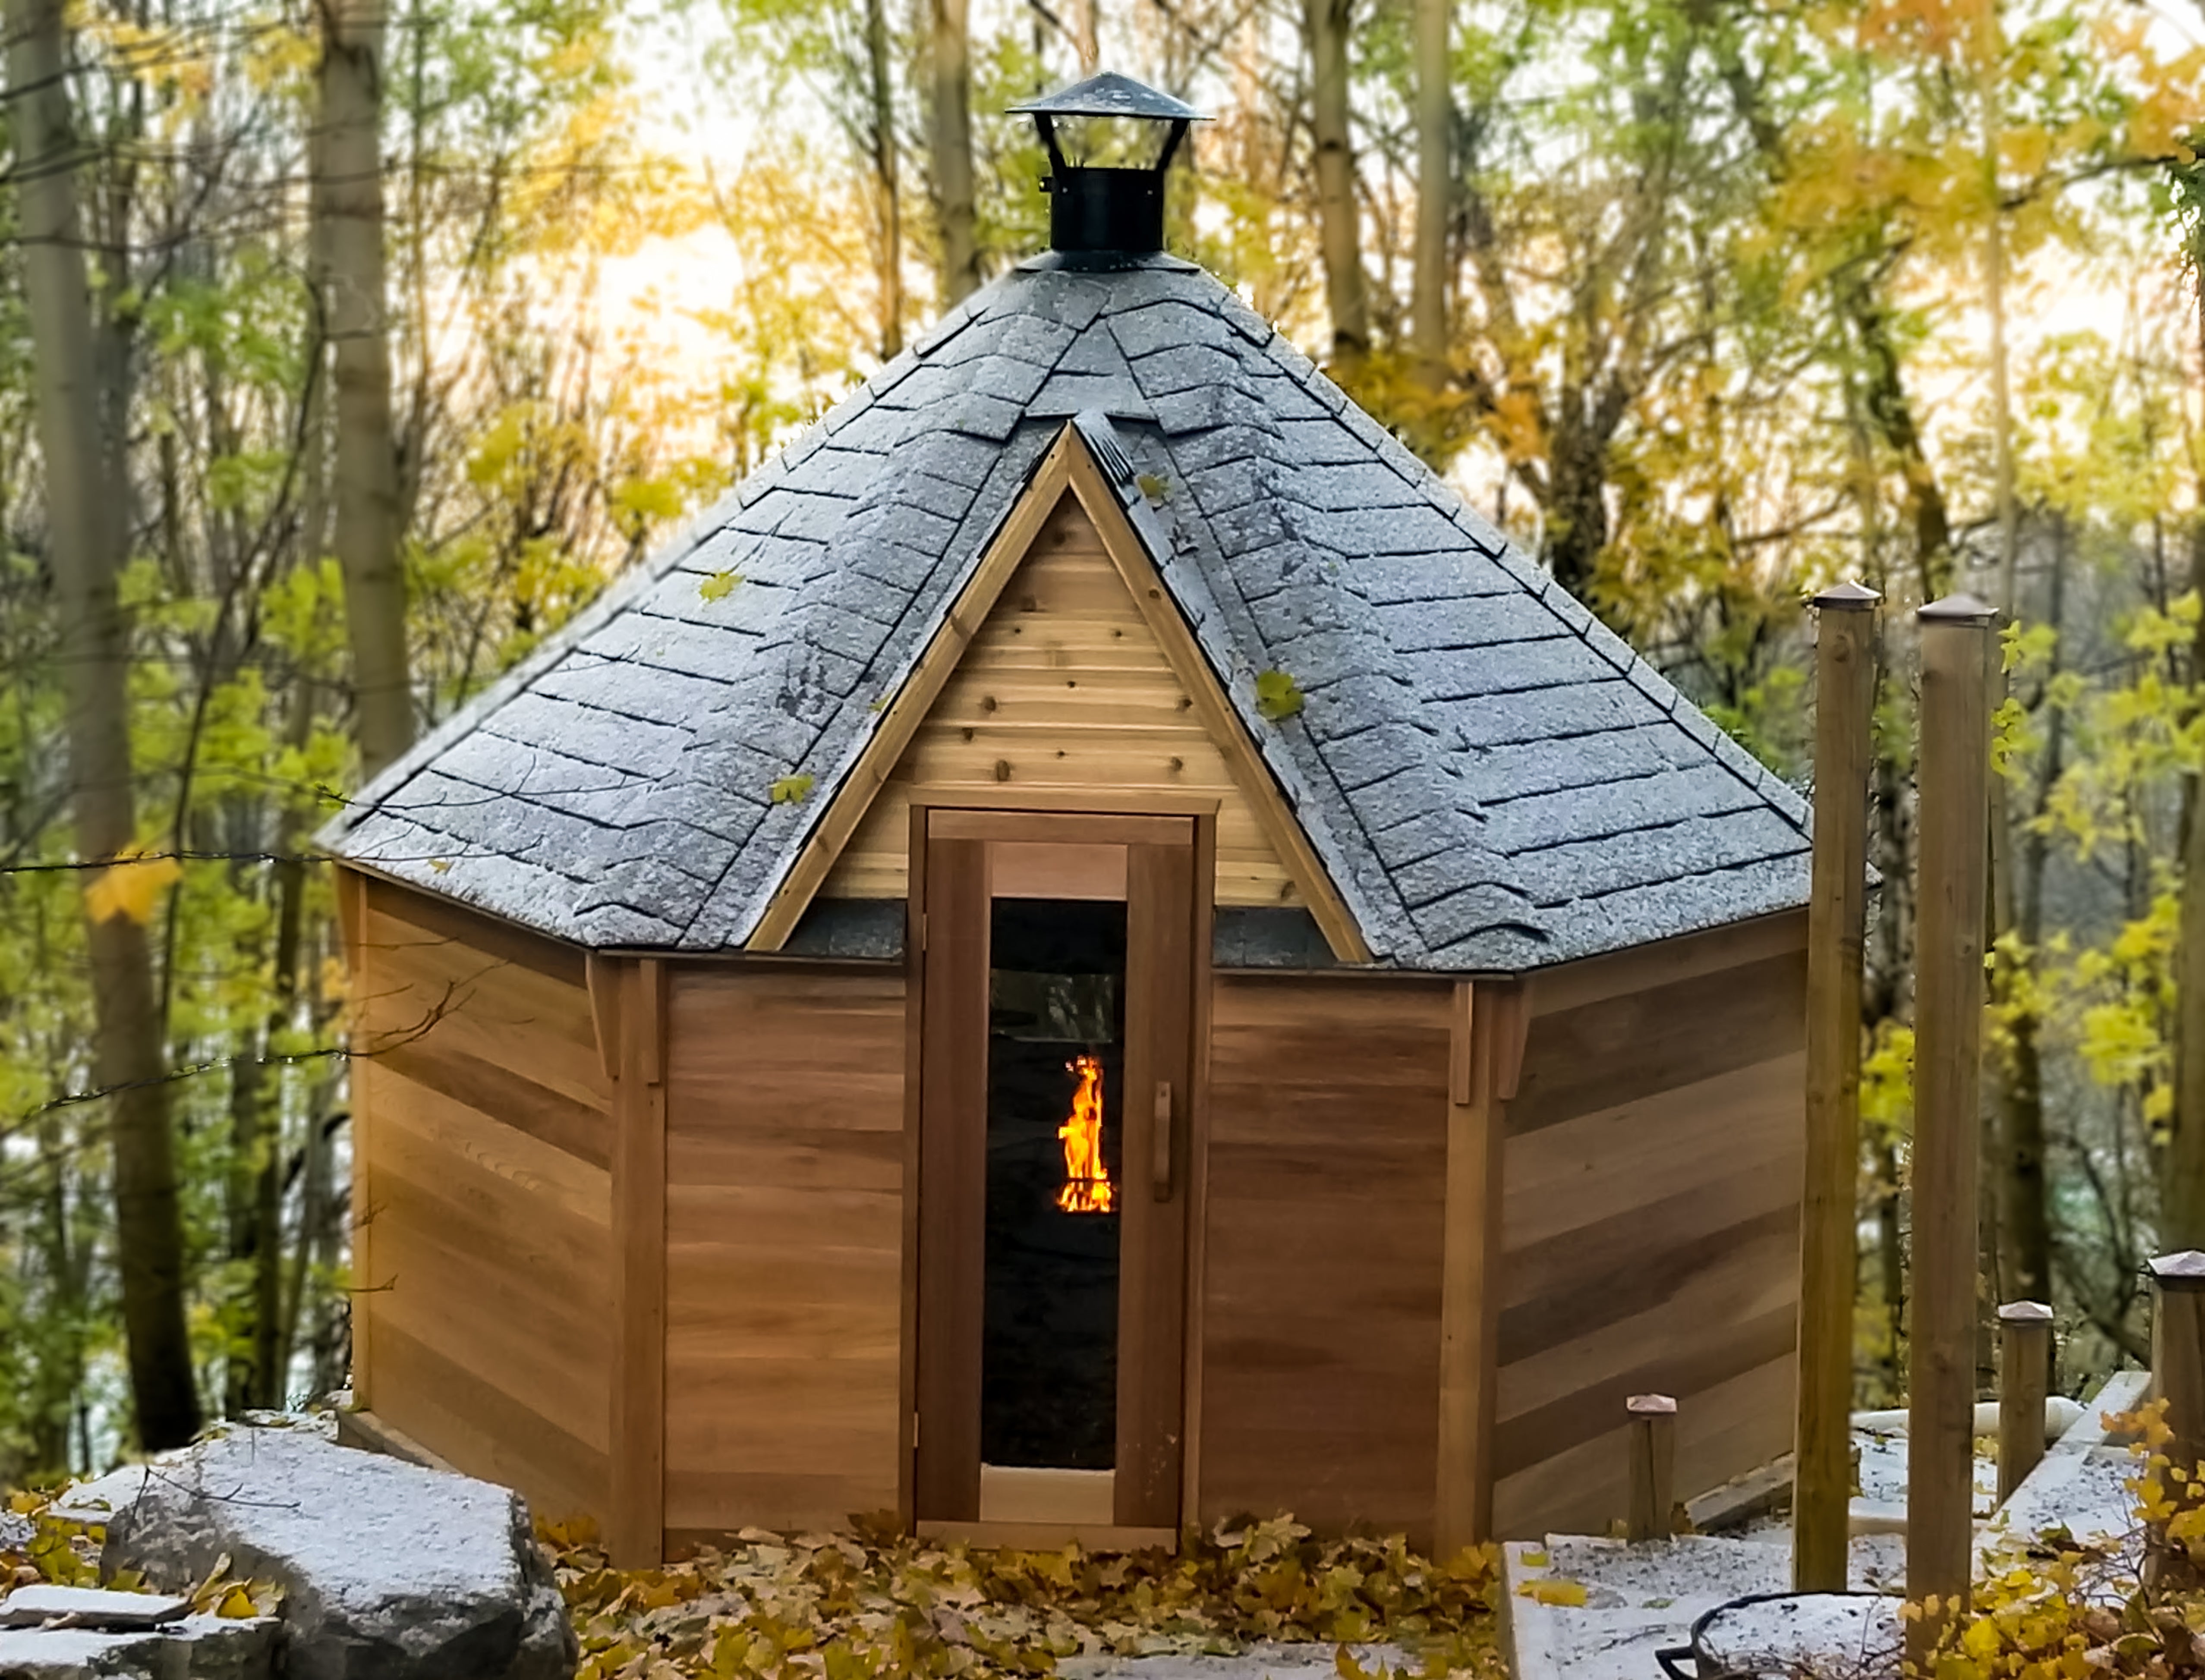  A red cedar Kota Cabin stands in a forested area with a fire burning visible through the pane glass door window.      